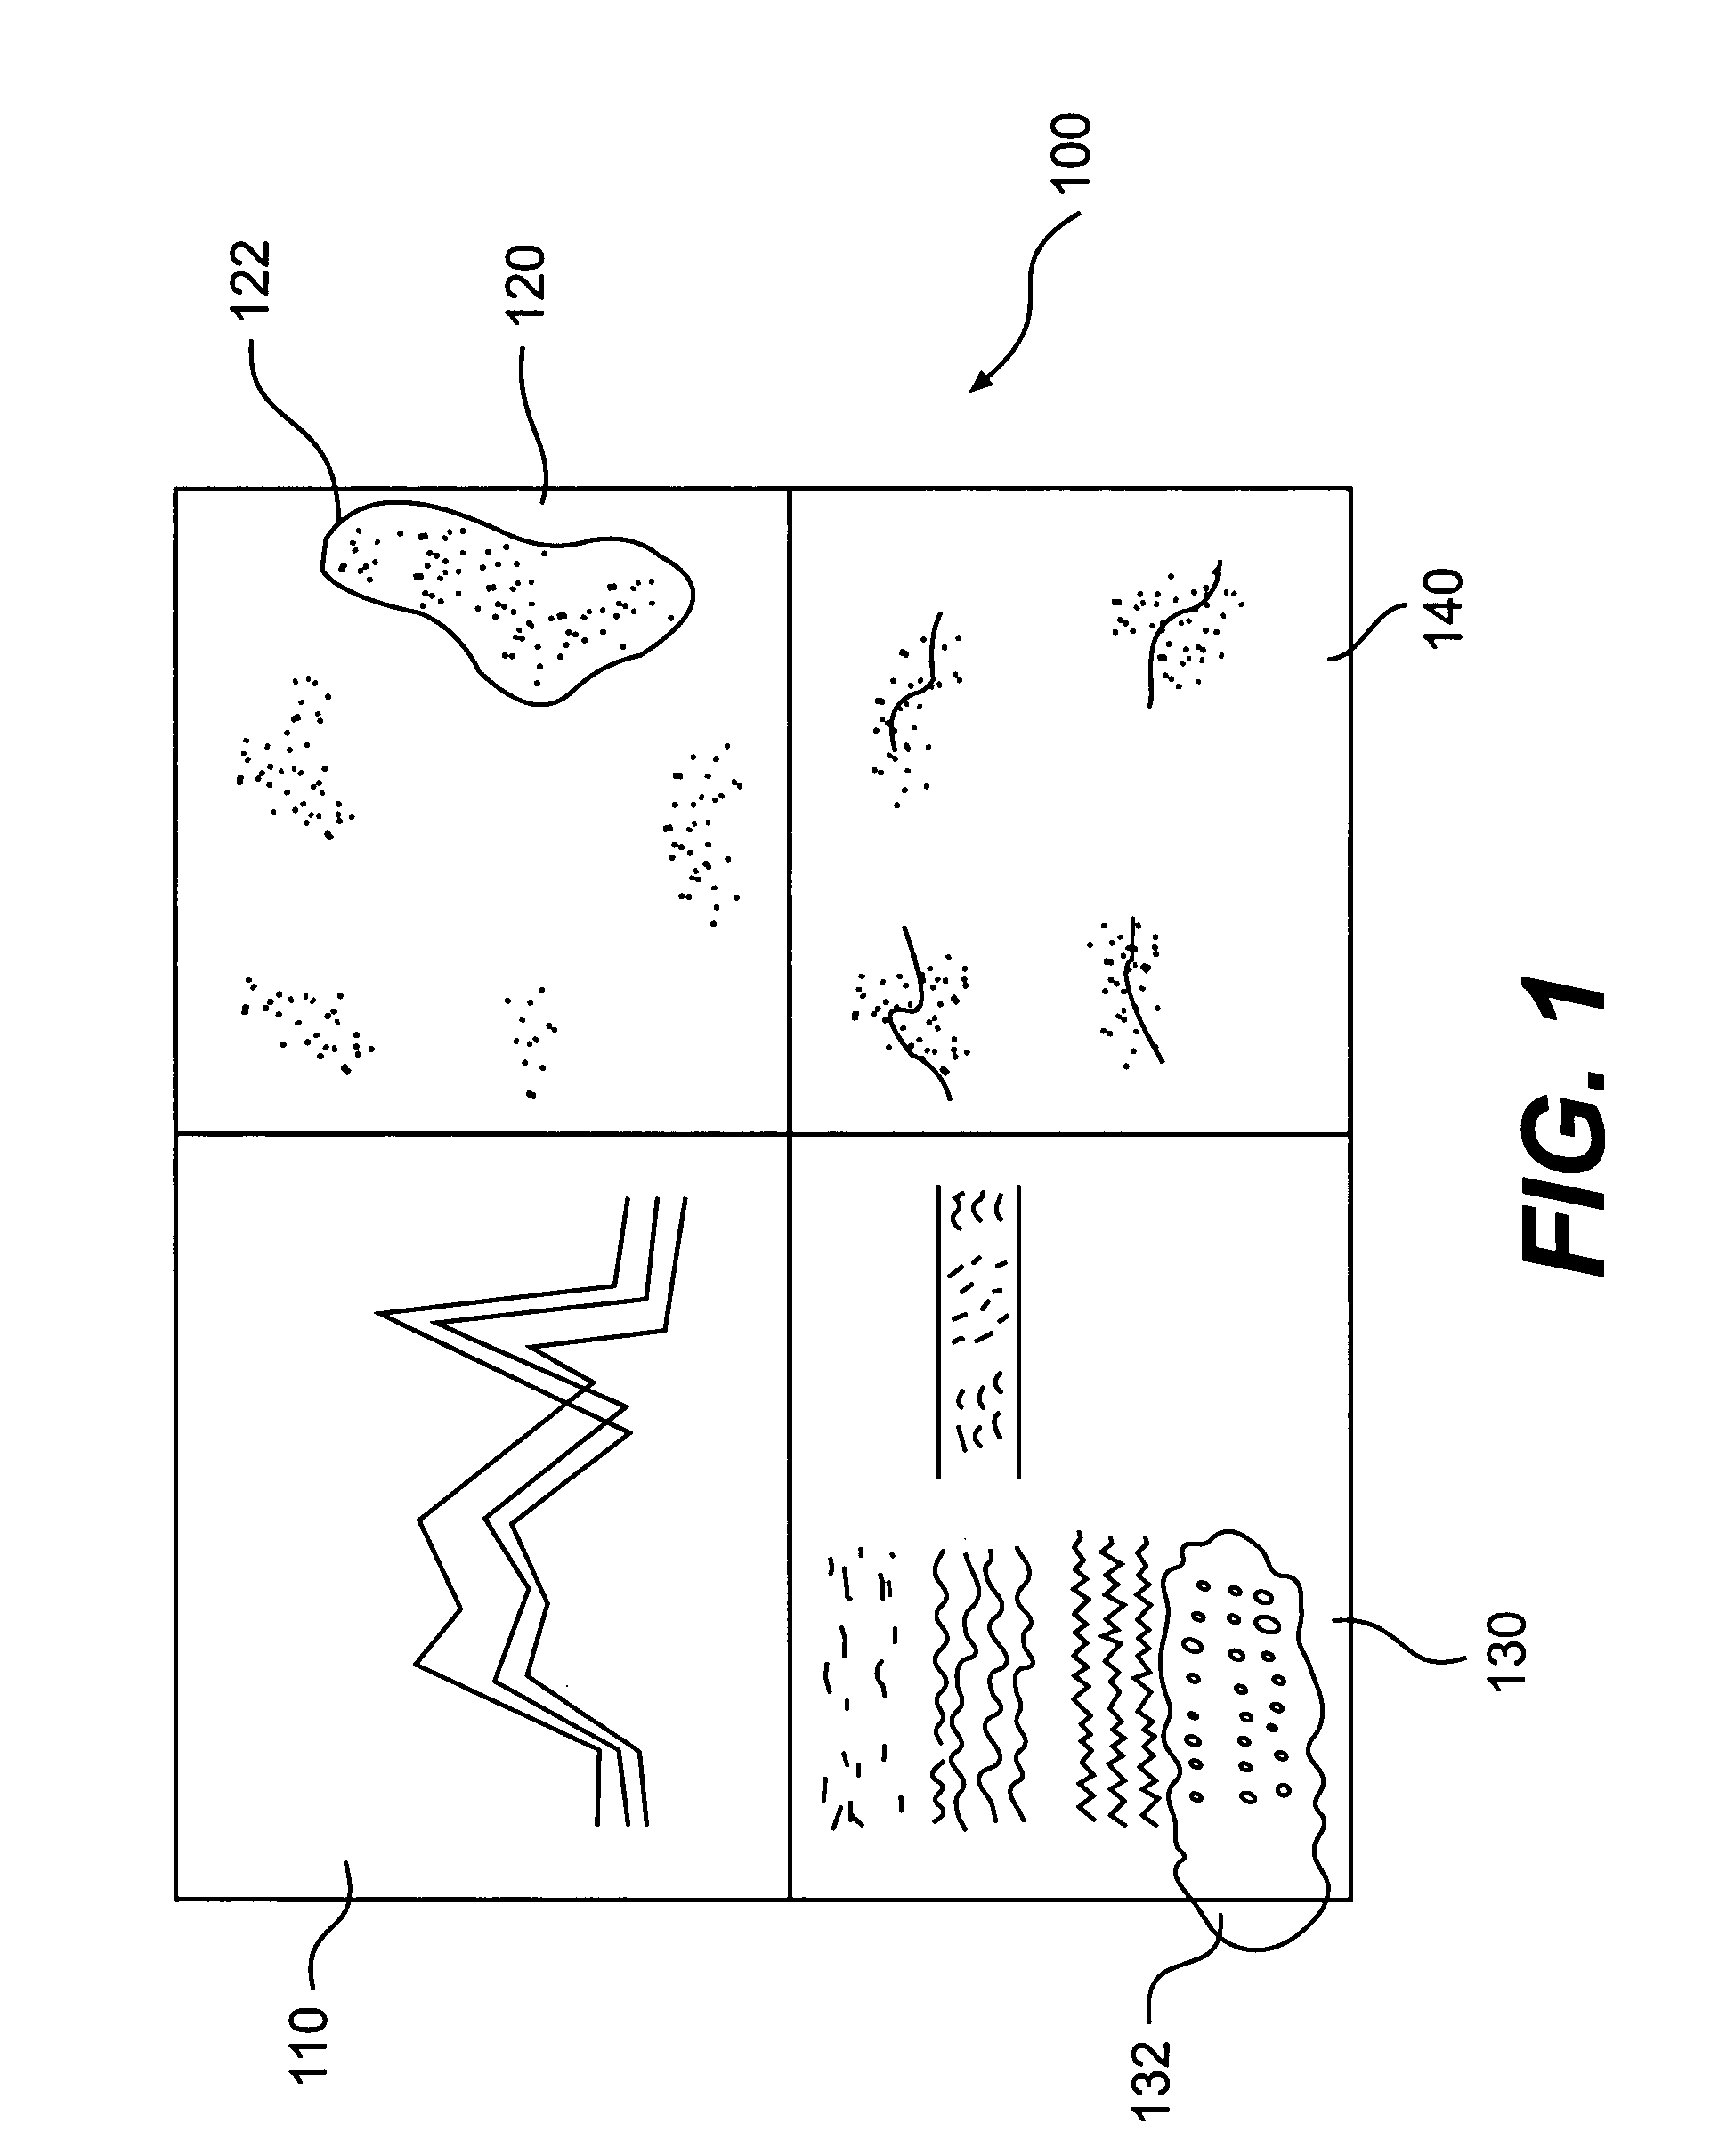 Data processing, analysis, and visualization system for use with disparate data types